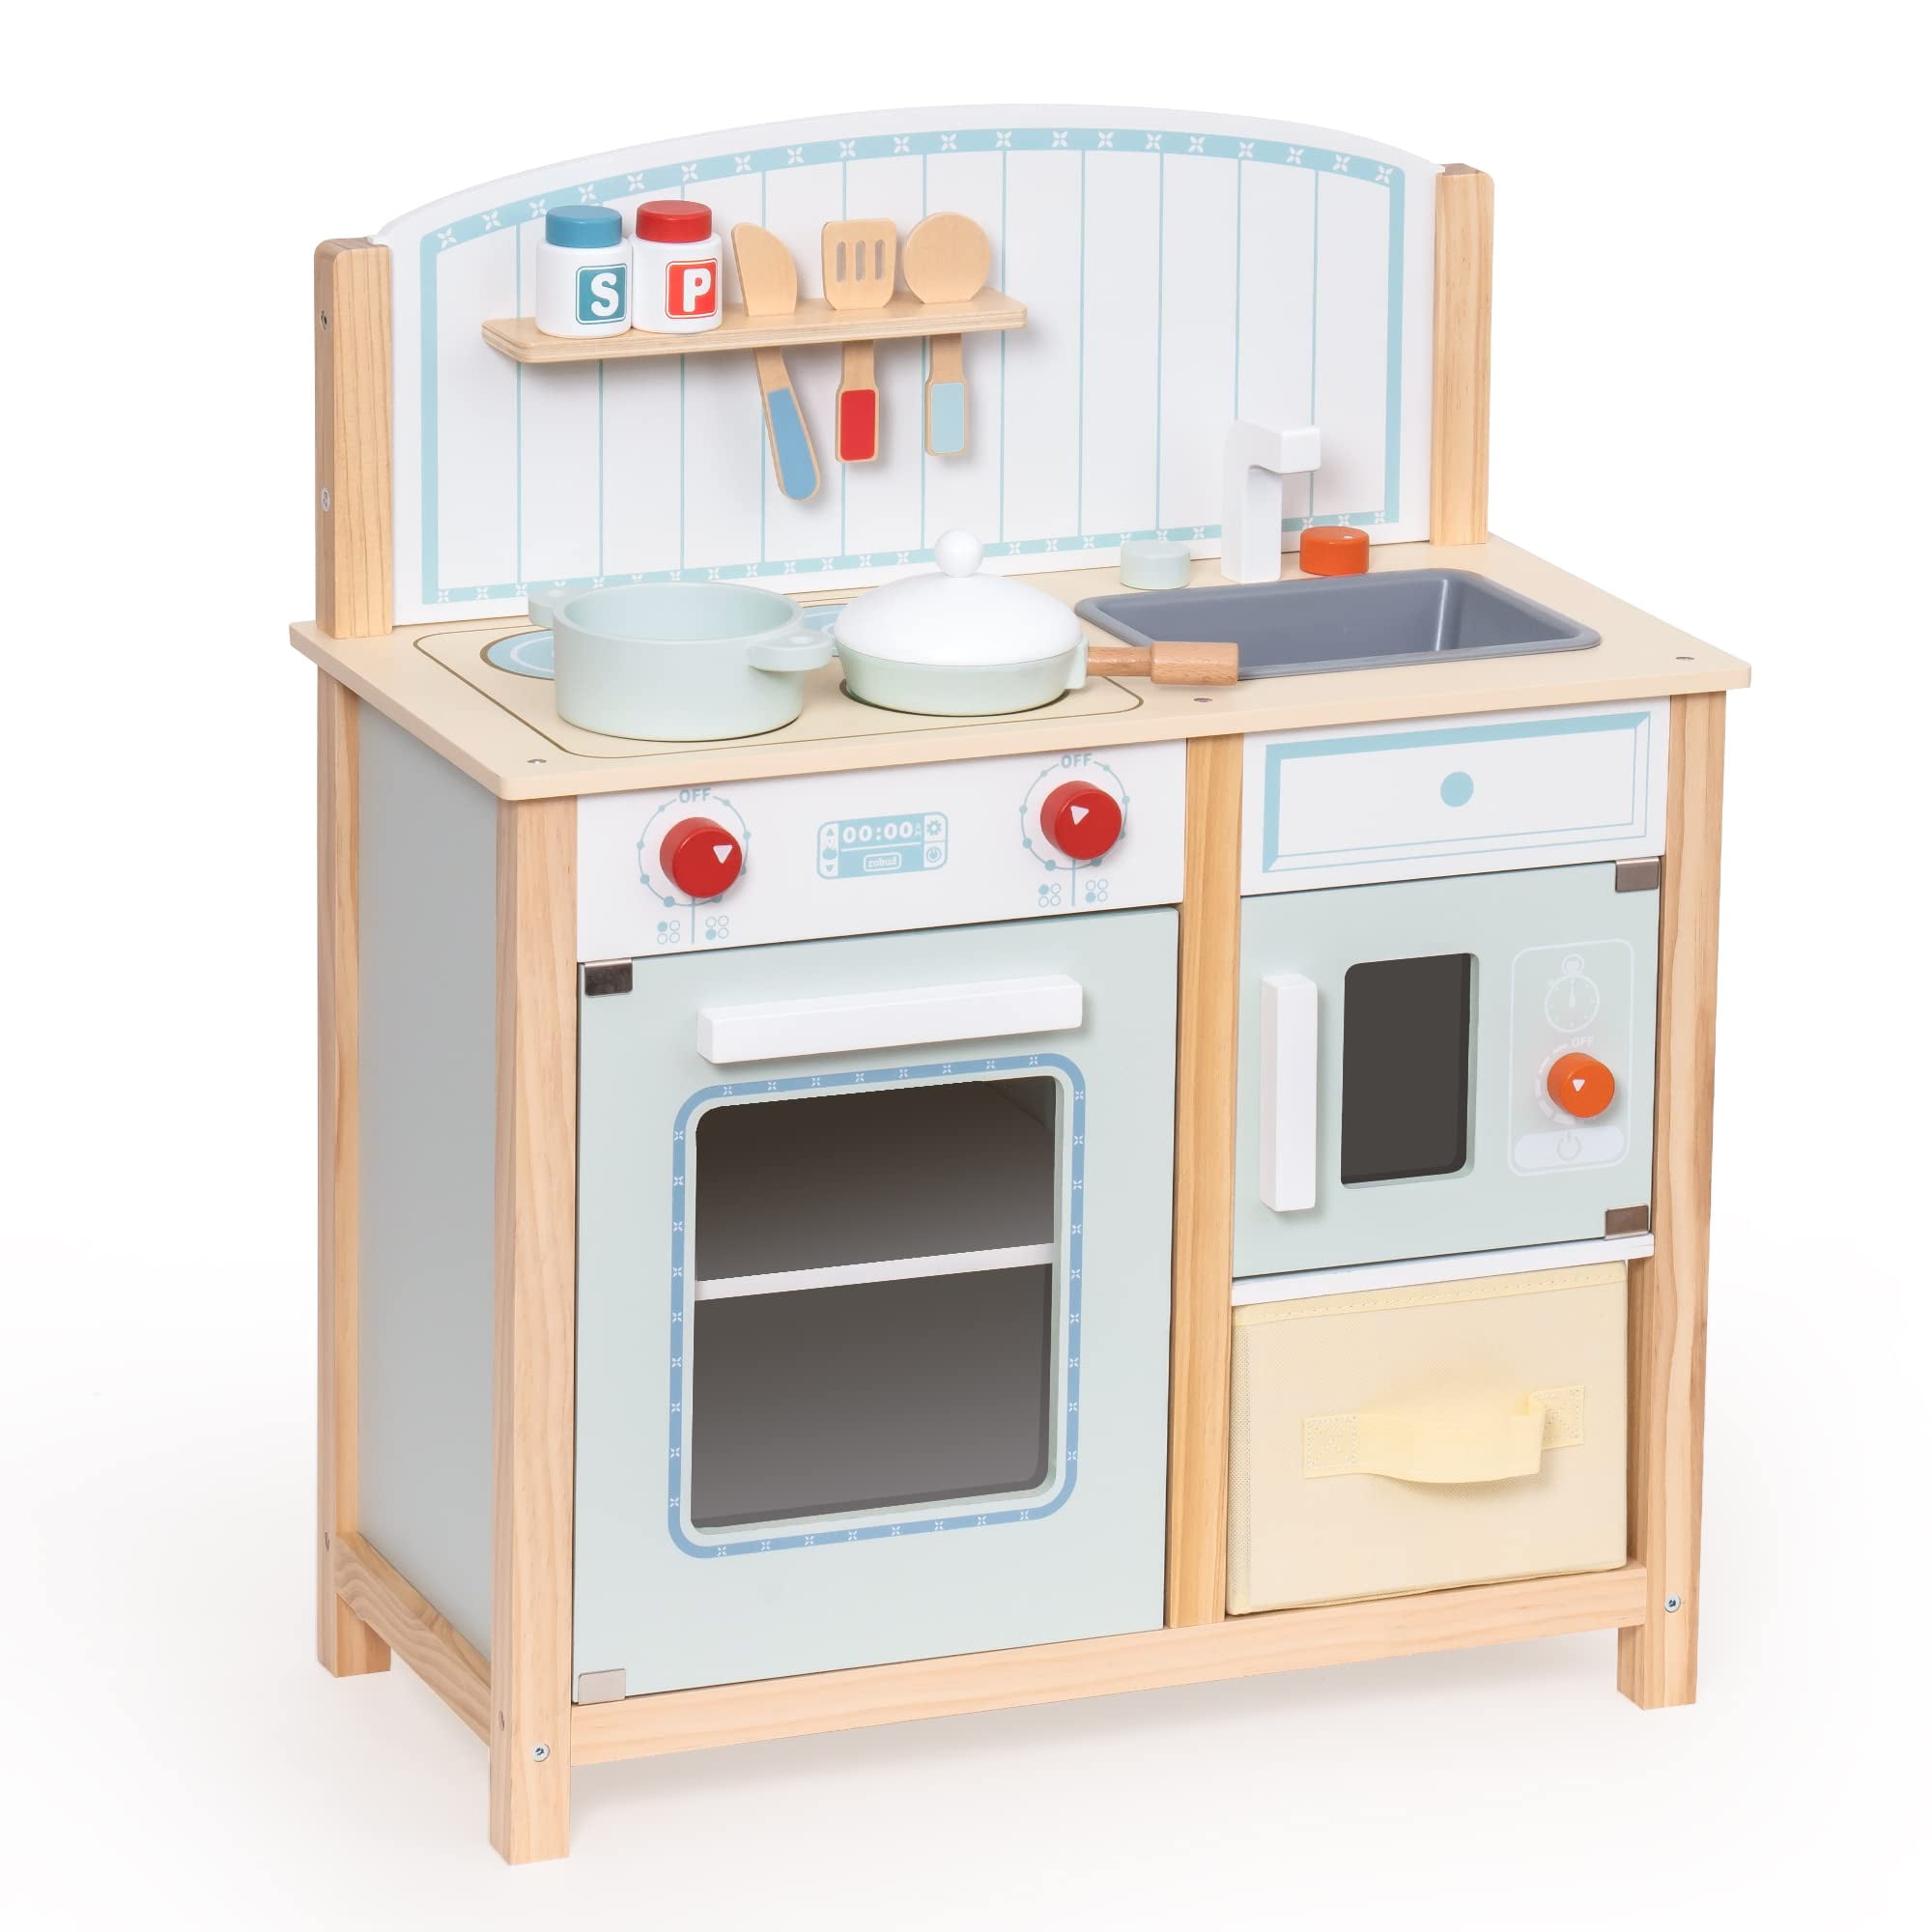 Robud Pretend Play Kitchen Wooden set with Storage Bin,Gift for Toddlers Ages 3+,Blue Walmart.com